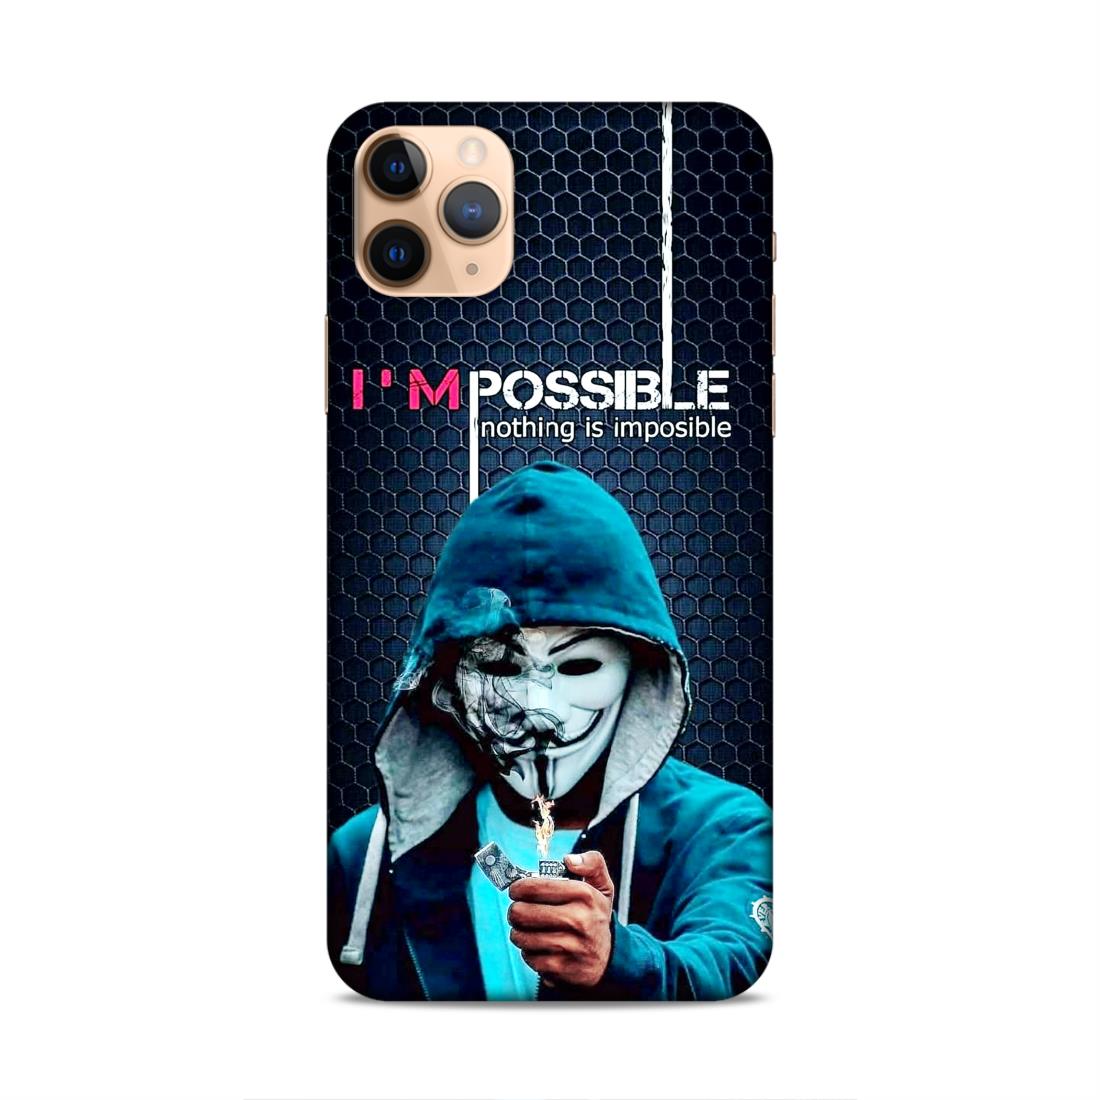 Im Possible Hard Back Case For Apple iPhone 11 Pro